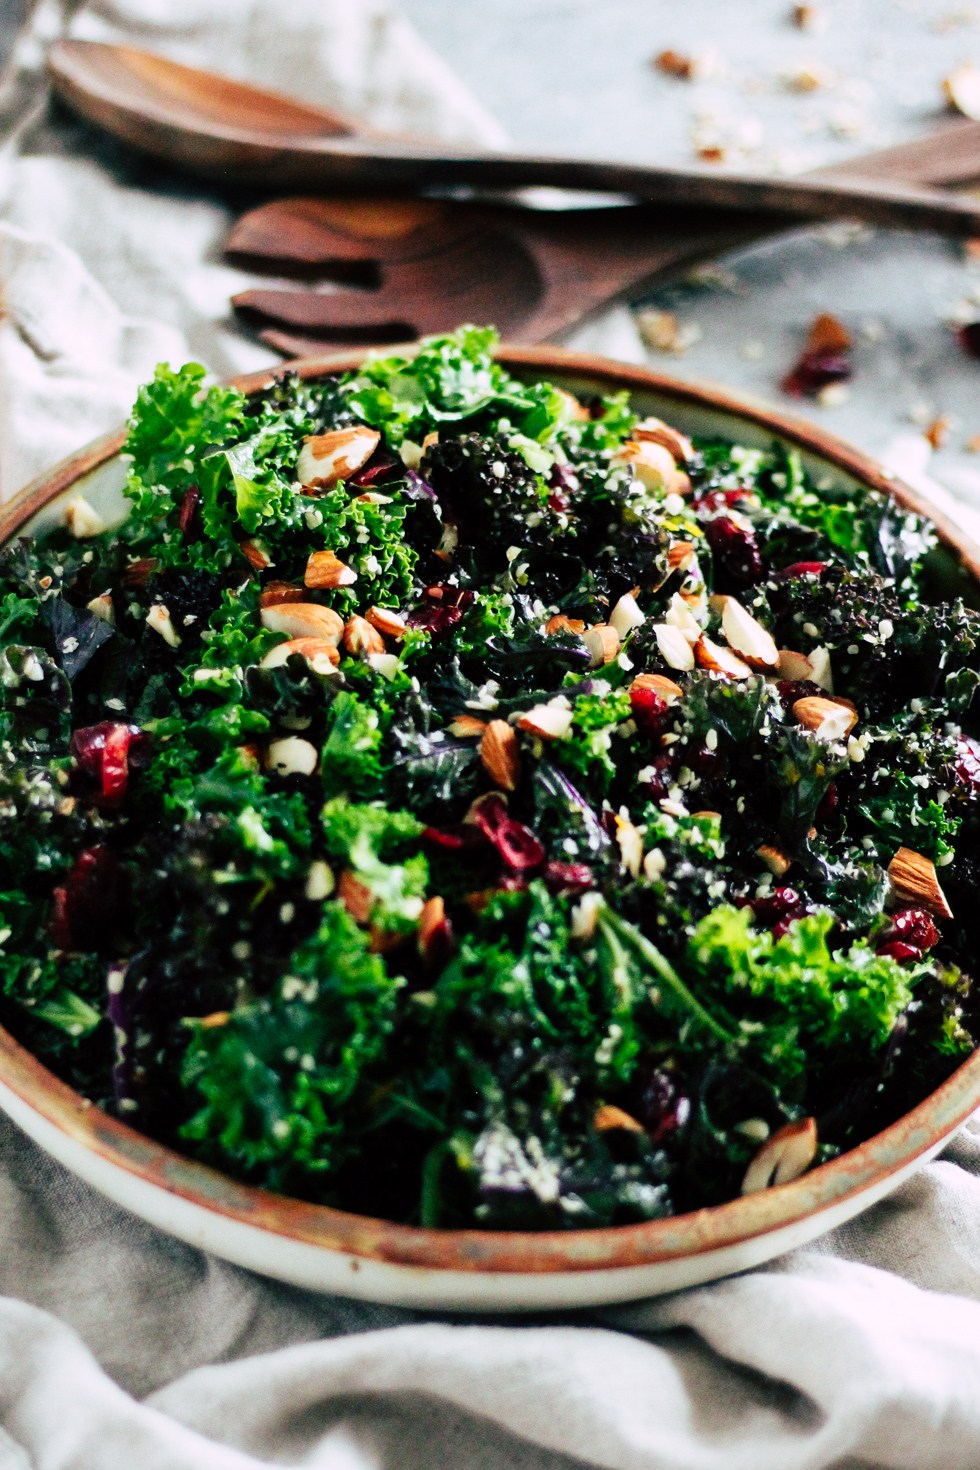 Make-Ahead Kale Salad in ceramic dish for easy college meals